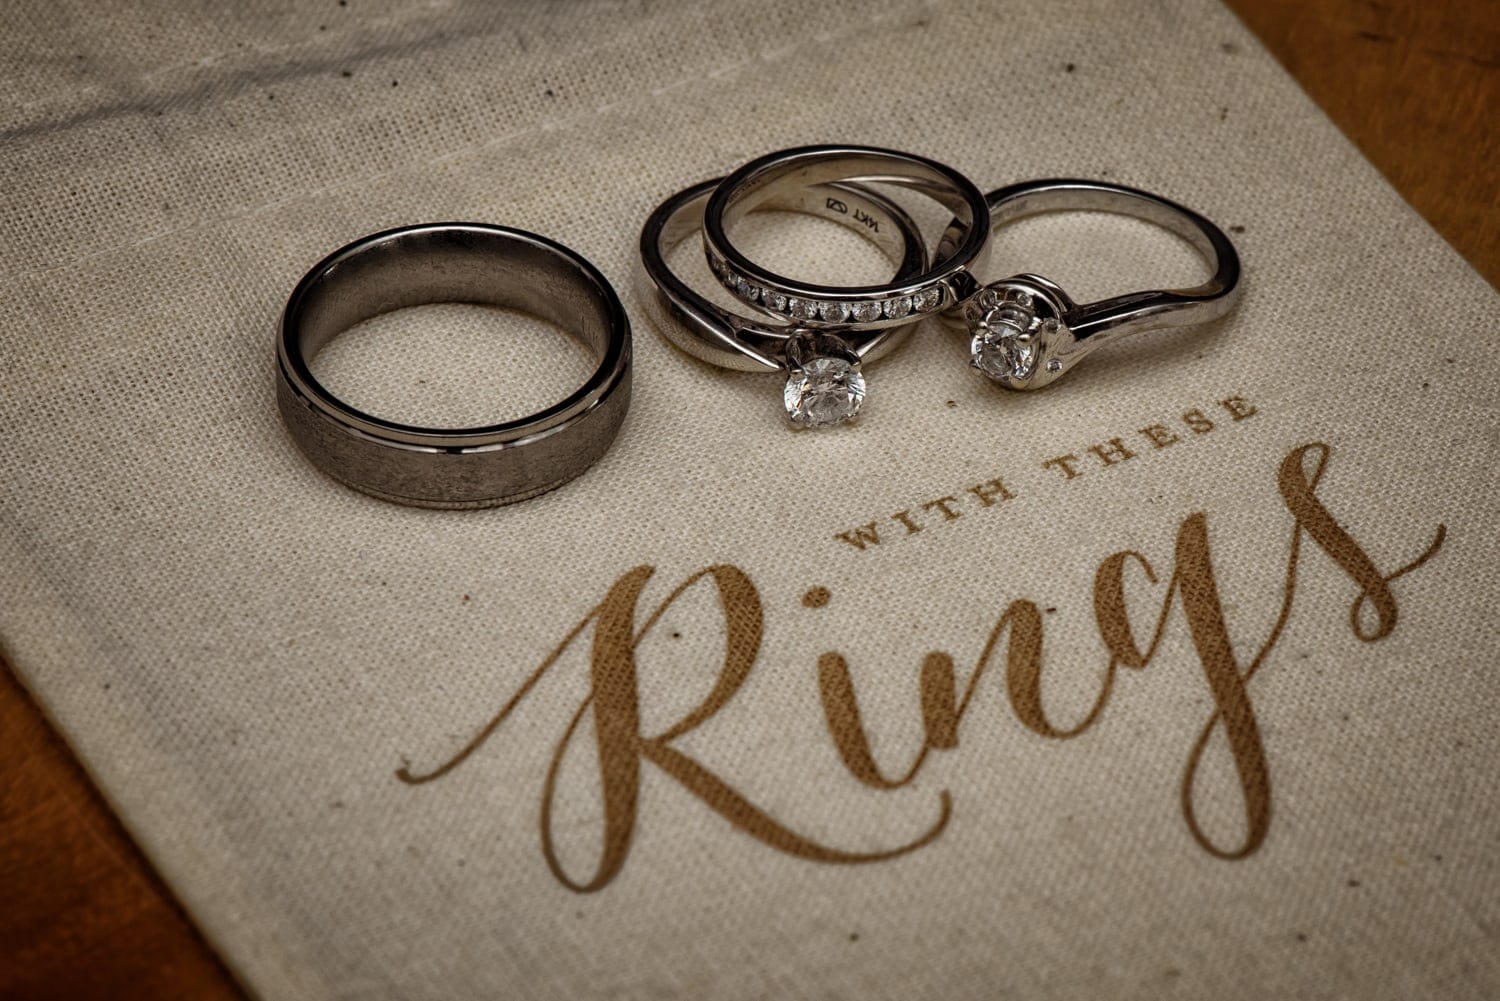 The bride and groom wedding bands on a cute with this ring we thee wed ivory burlap bag.